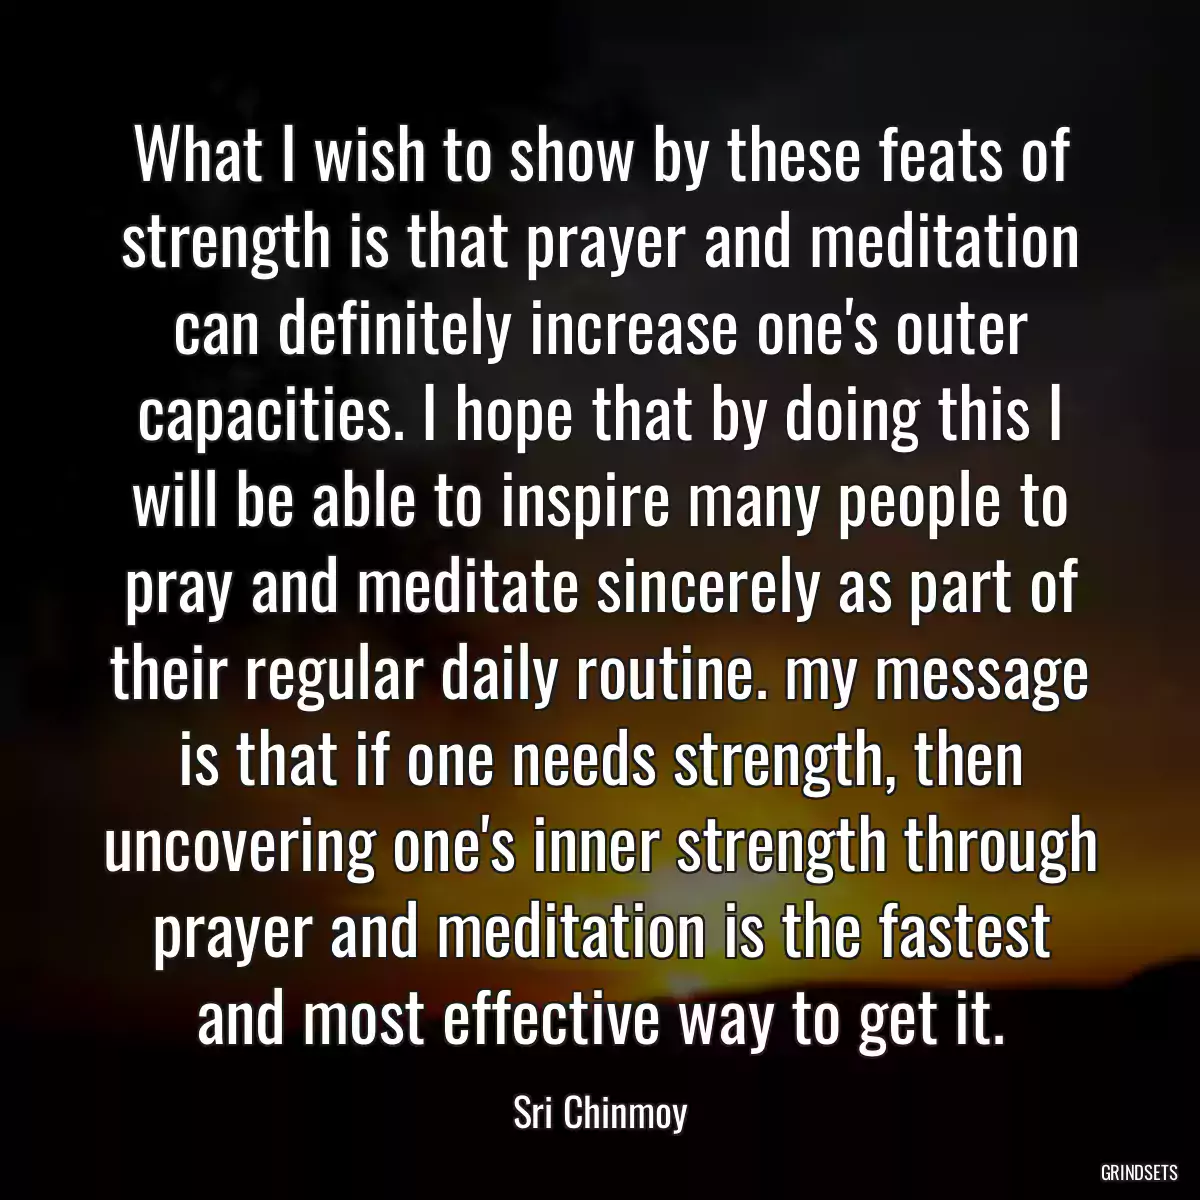 What I wish to show by these feats of strength is that prayer and meditation can definitely increase one\'s outer capacities. I hope that by doing this I will be able to inspire many people to pray and meditate sincerely as part of their regular daily routine. my message is that if one needs strength, then uncovering one\'s inner strength through prayer and meditation is the fastest and most effective way to get it.